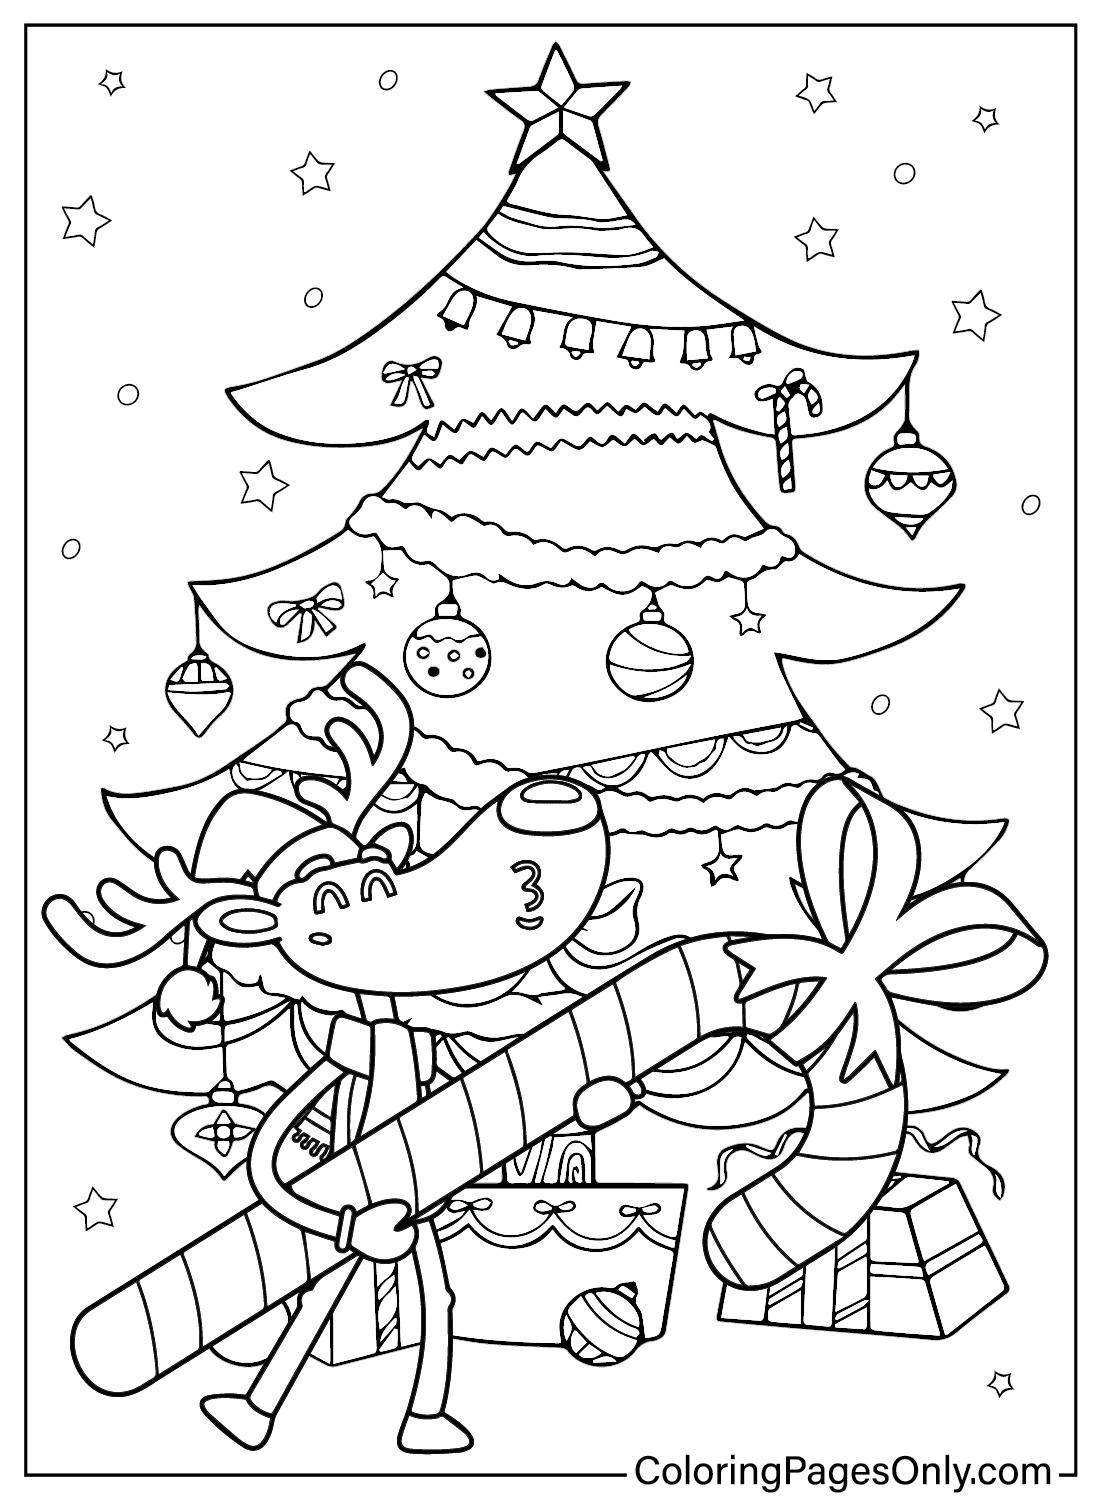 Christmas Candy Cane Coloring Page Free